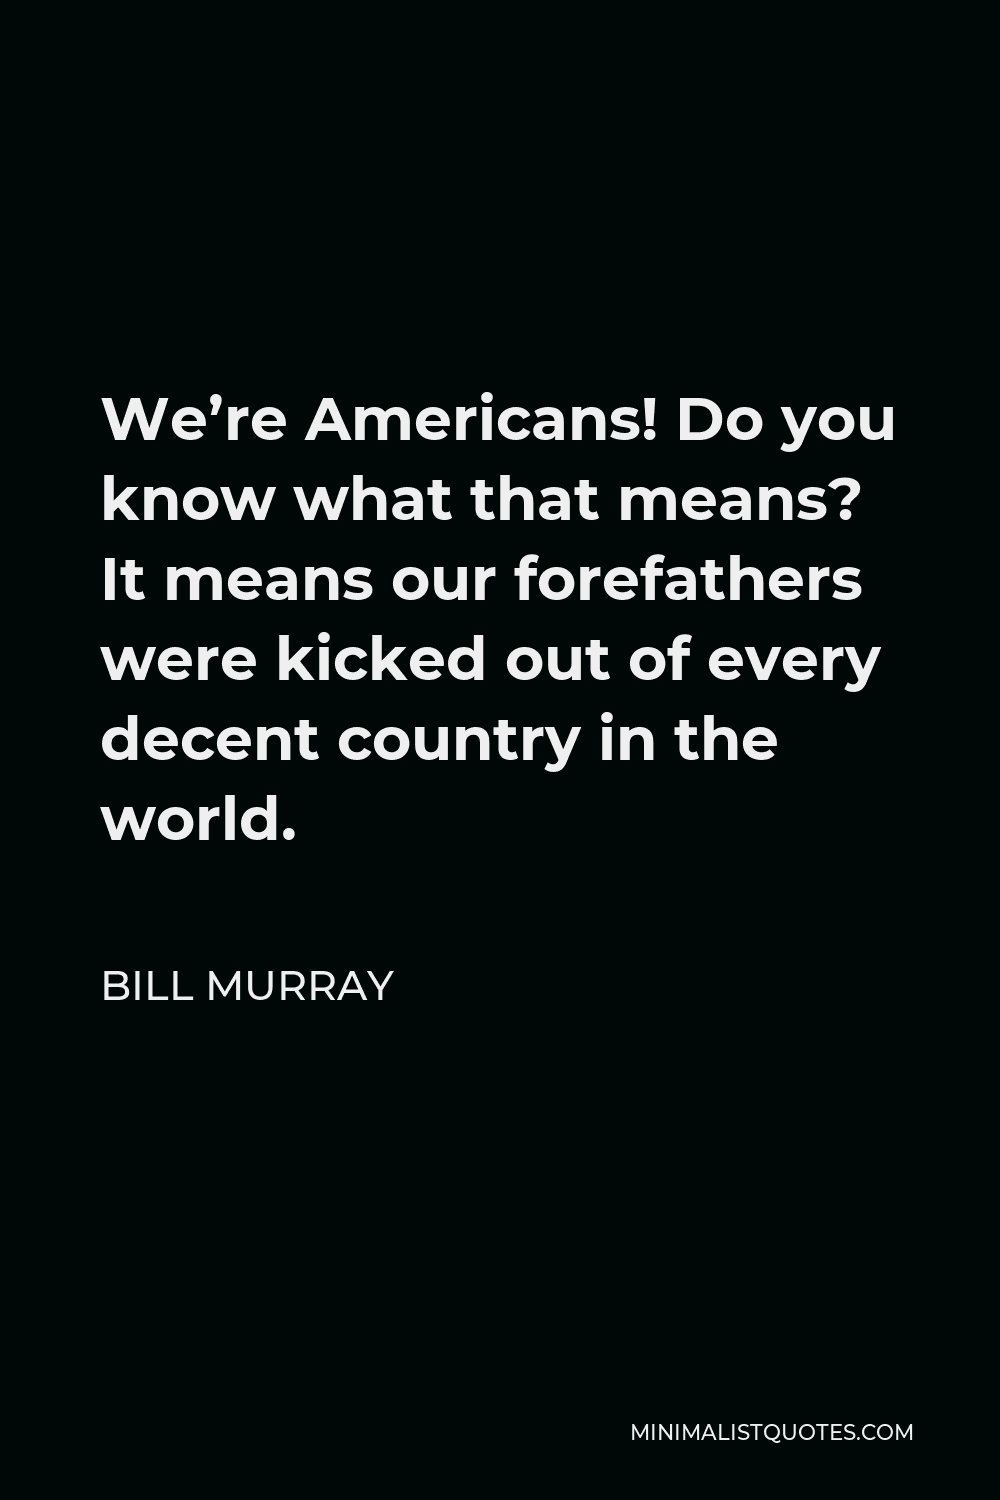 Bill Murray Quote - We’re Americans! Do you know what that means? It means our forefathers were kicked out of every decent country in the world.